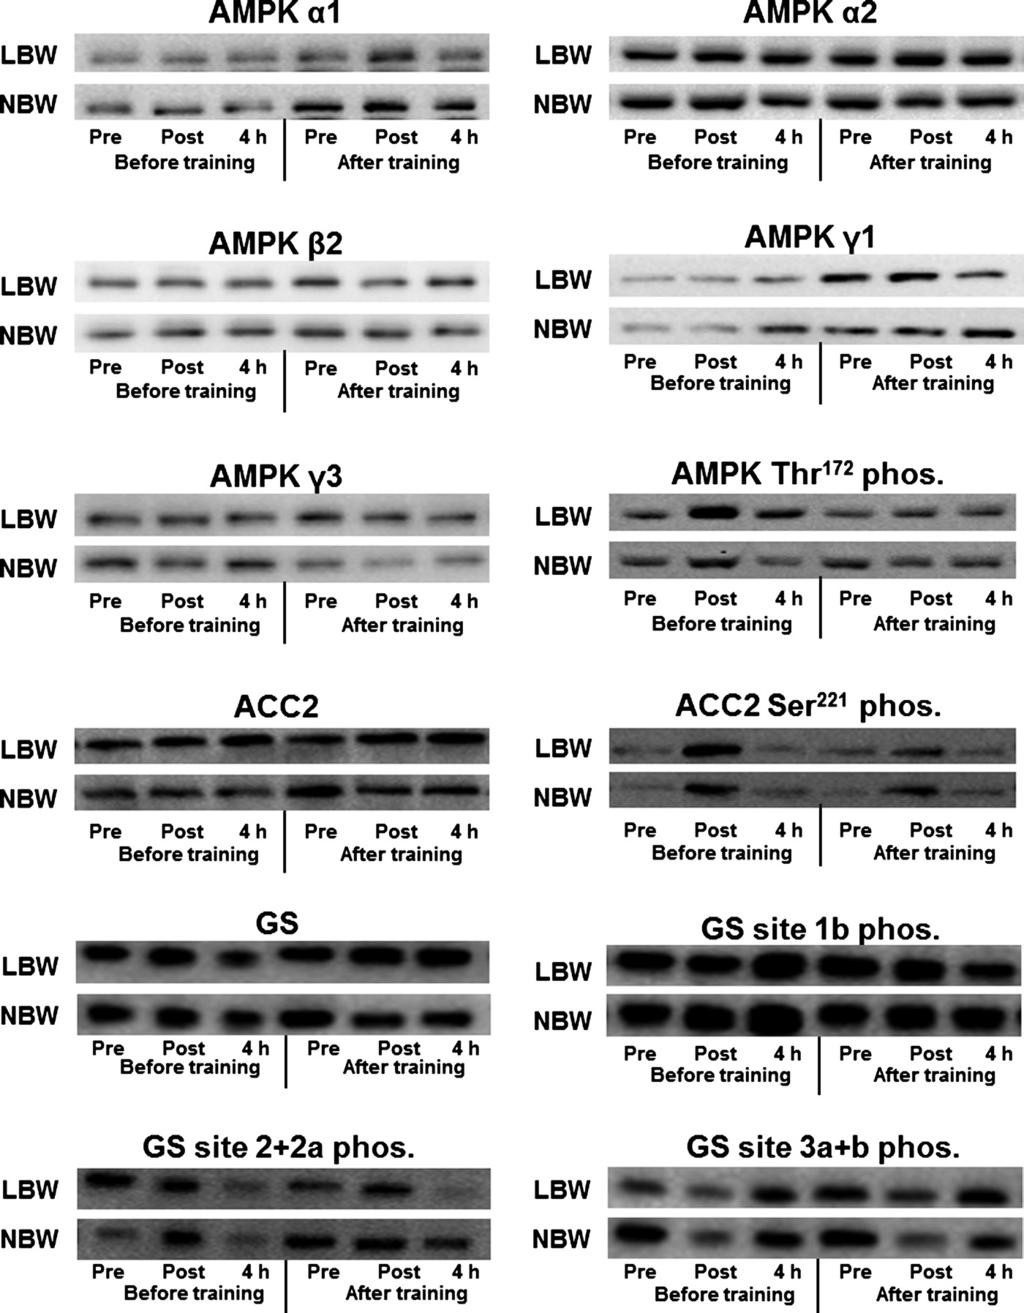 E1384 Fig. 2. Representative blots. Examples of representative Western blots shown for acute exercise effects, group effects, and training effects for AMPK-, ACC2-, and GS-derived measurements.